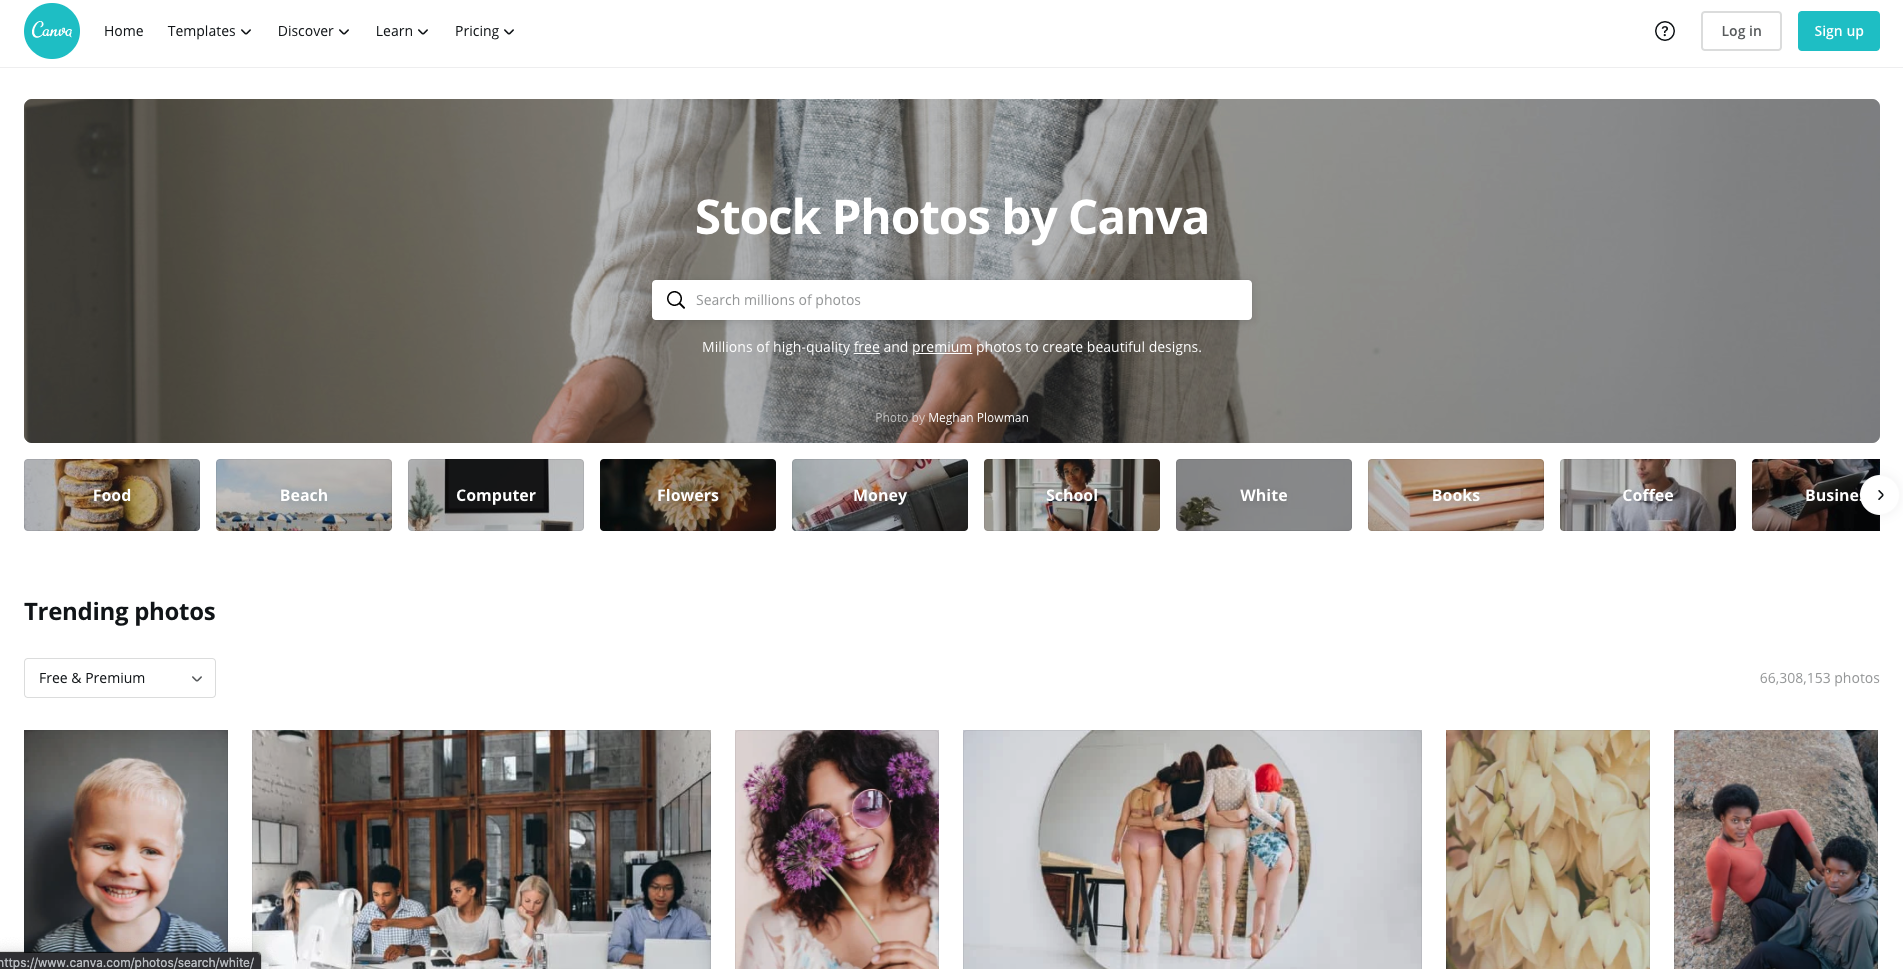 Stock Photos by Canva